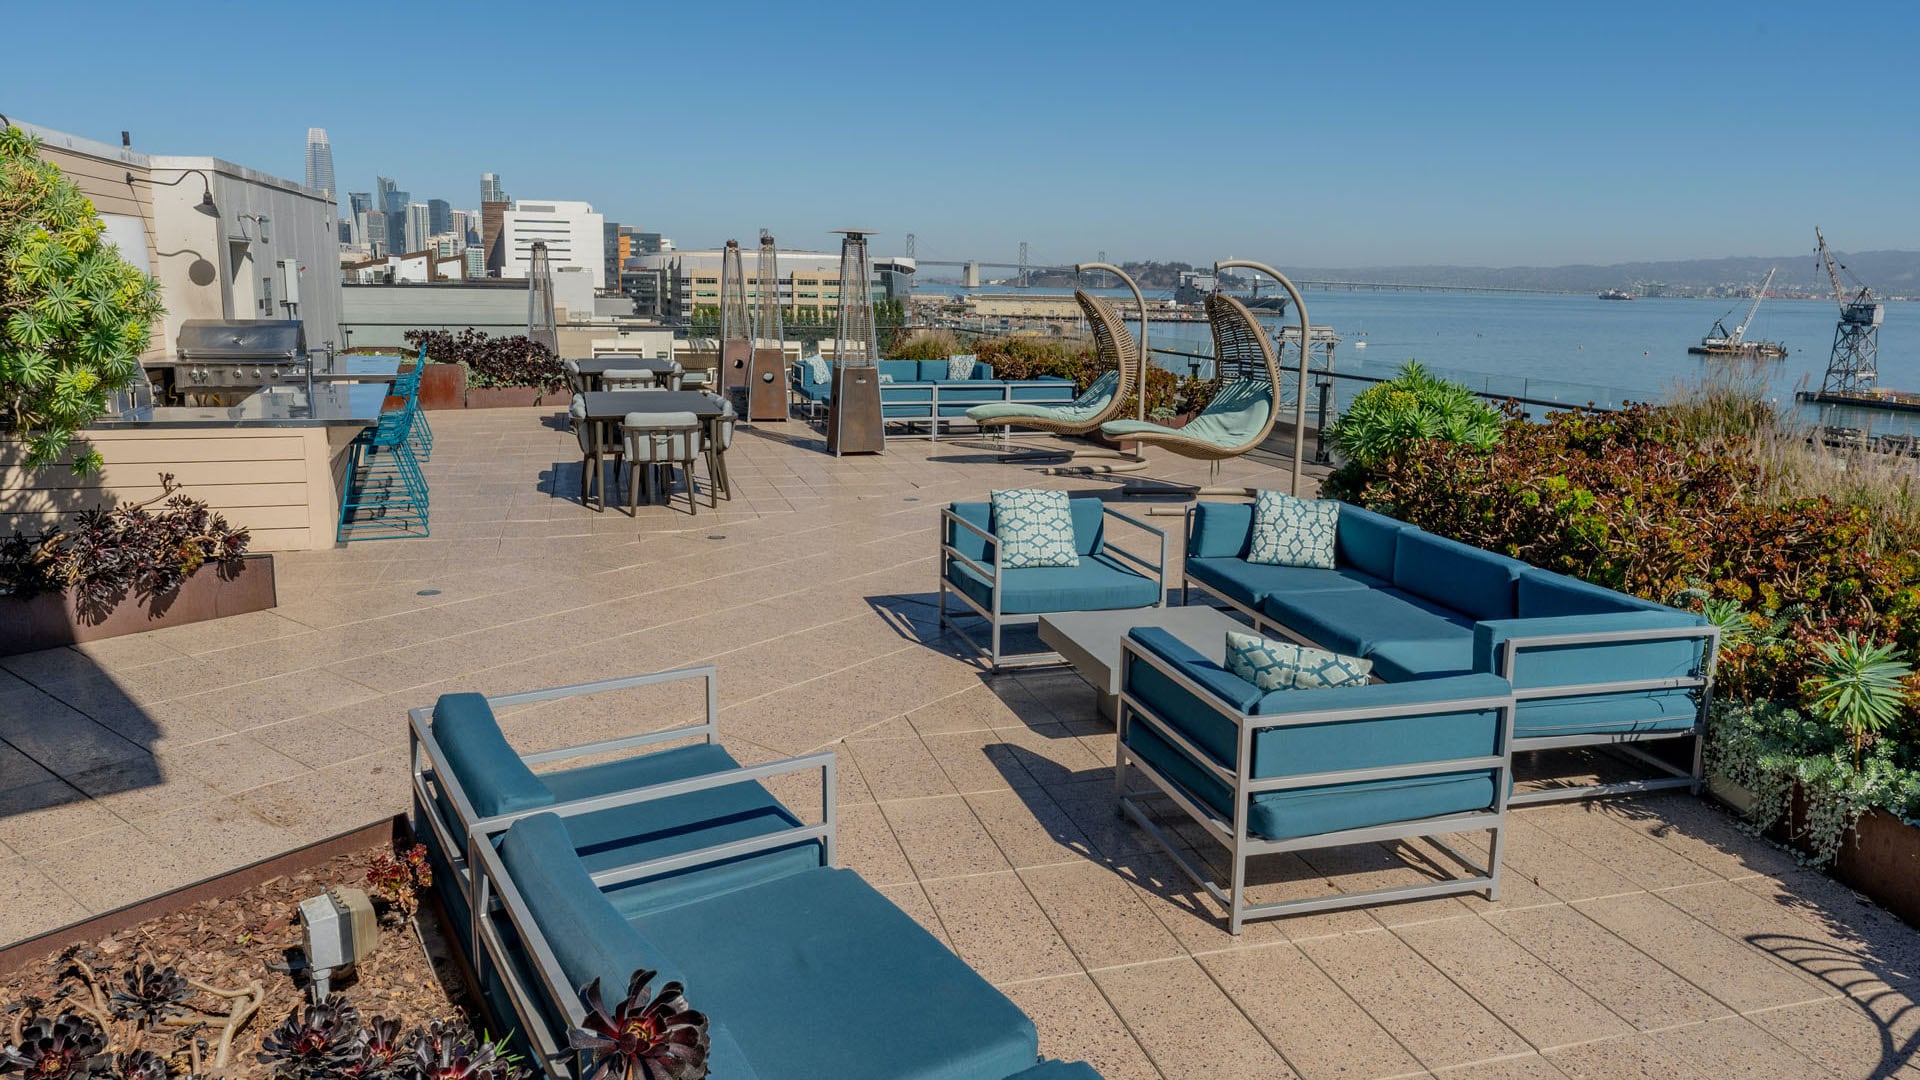 Apartments for Rent Dogpatch- Skylounge Spa With Lounge Chairs and Stunning View of San Francisco Skyline